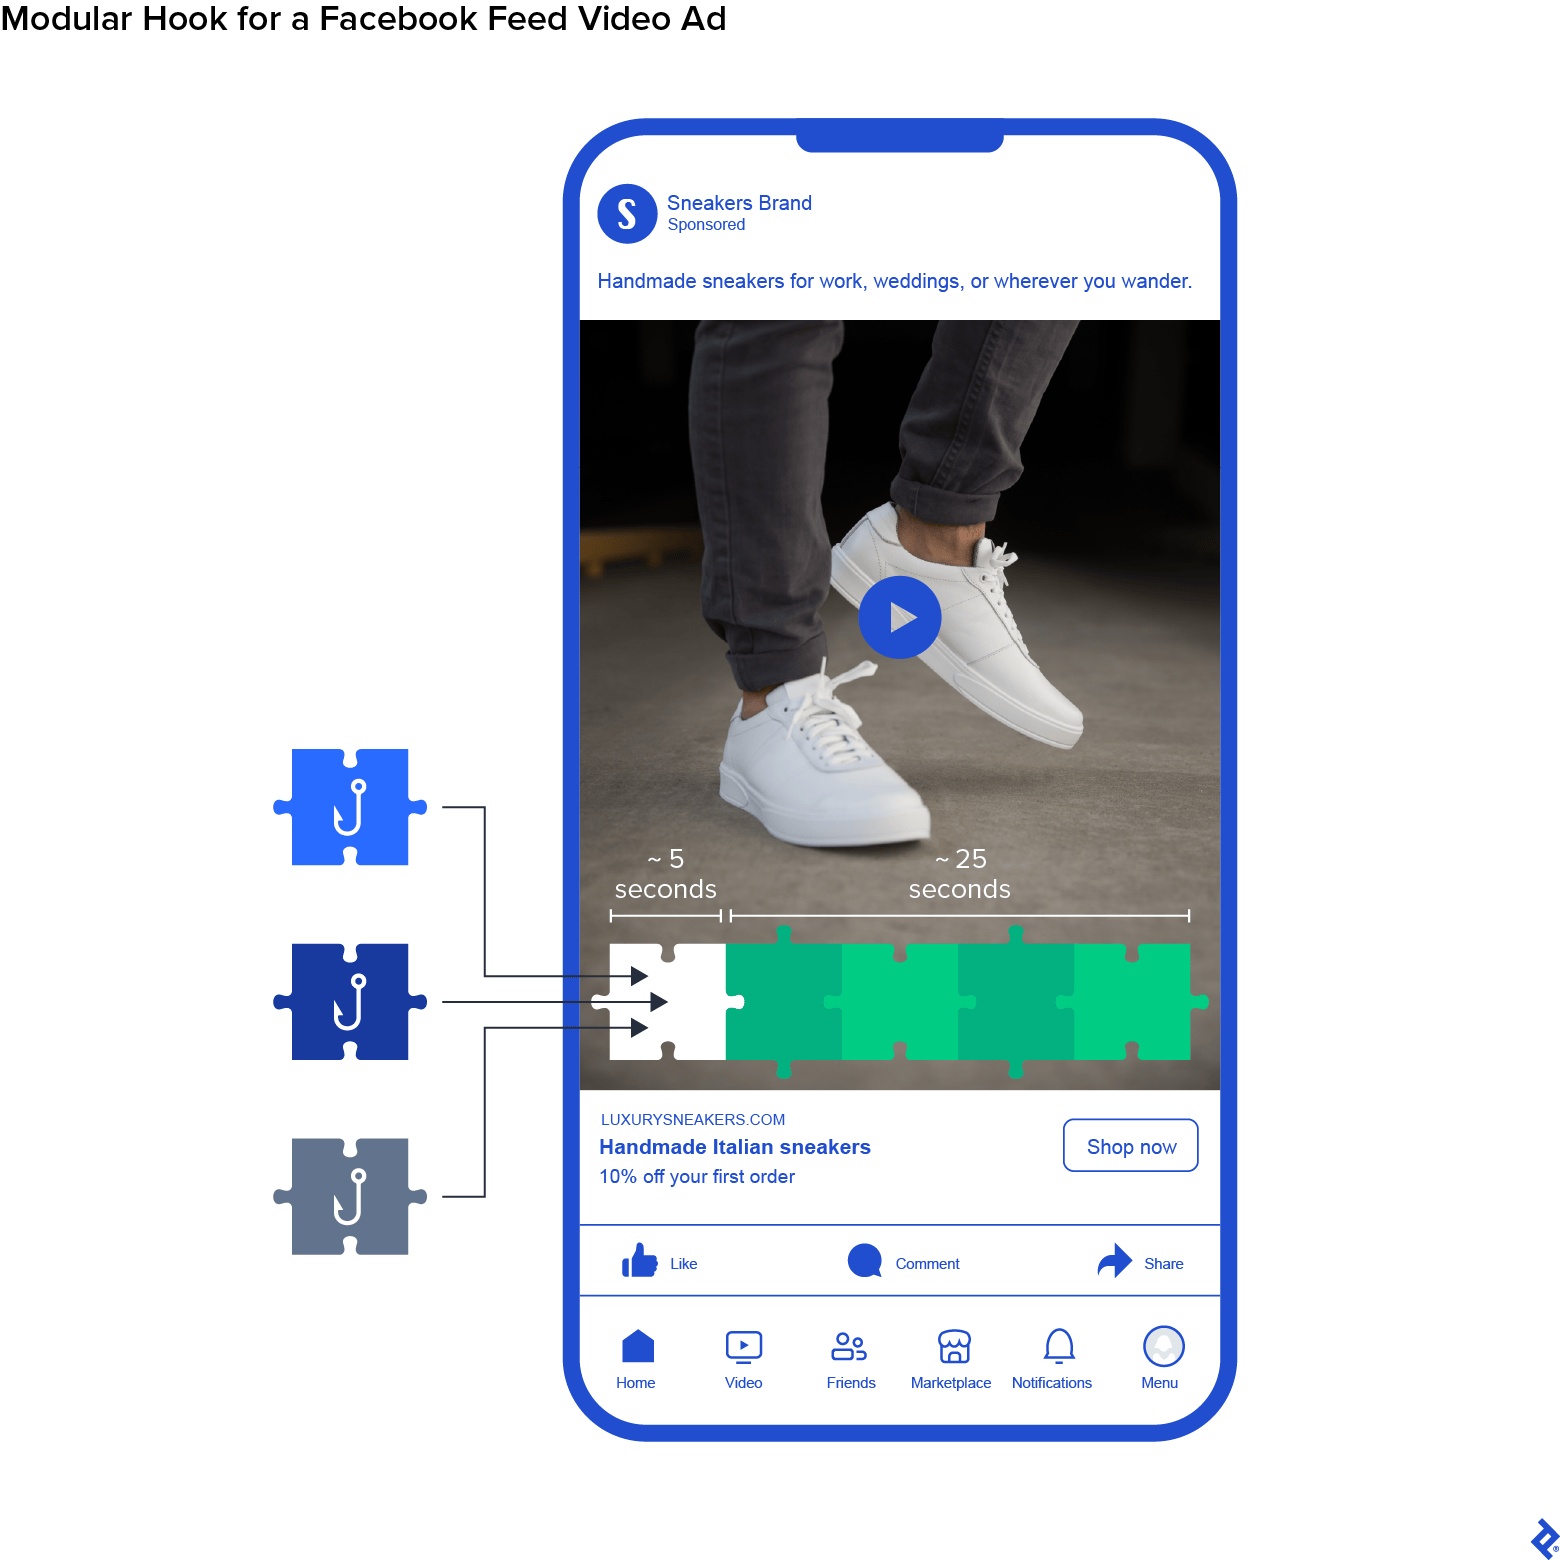 A five-second modular hook for luxury sneakers can be plugged into the beginning of an ad while leaving the remaining 25 seconds unchanged.